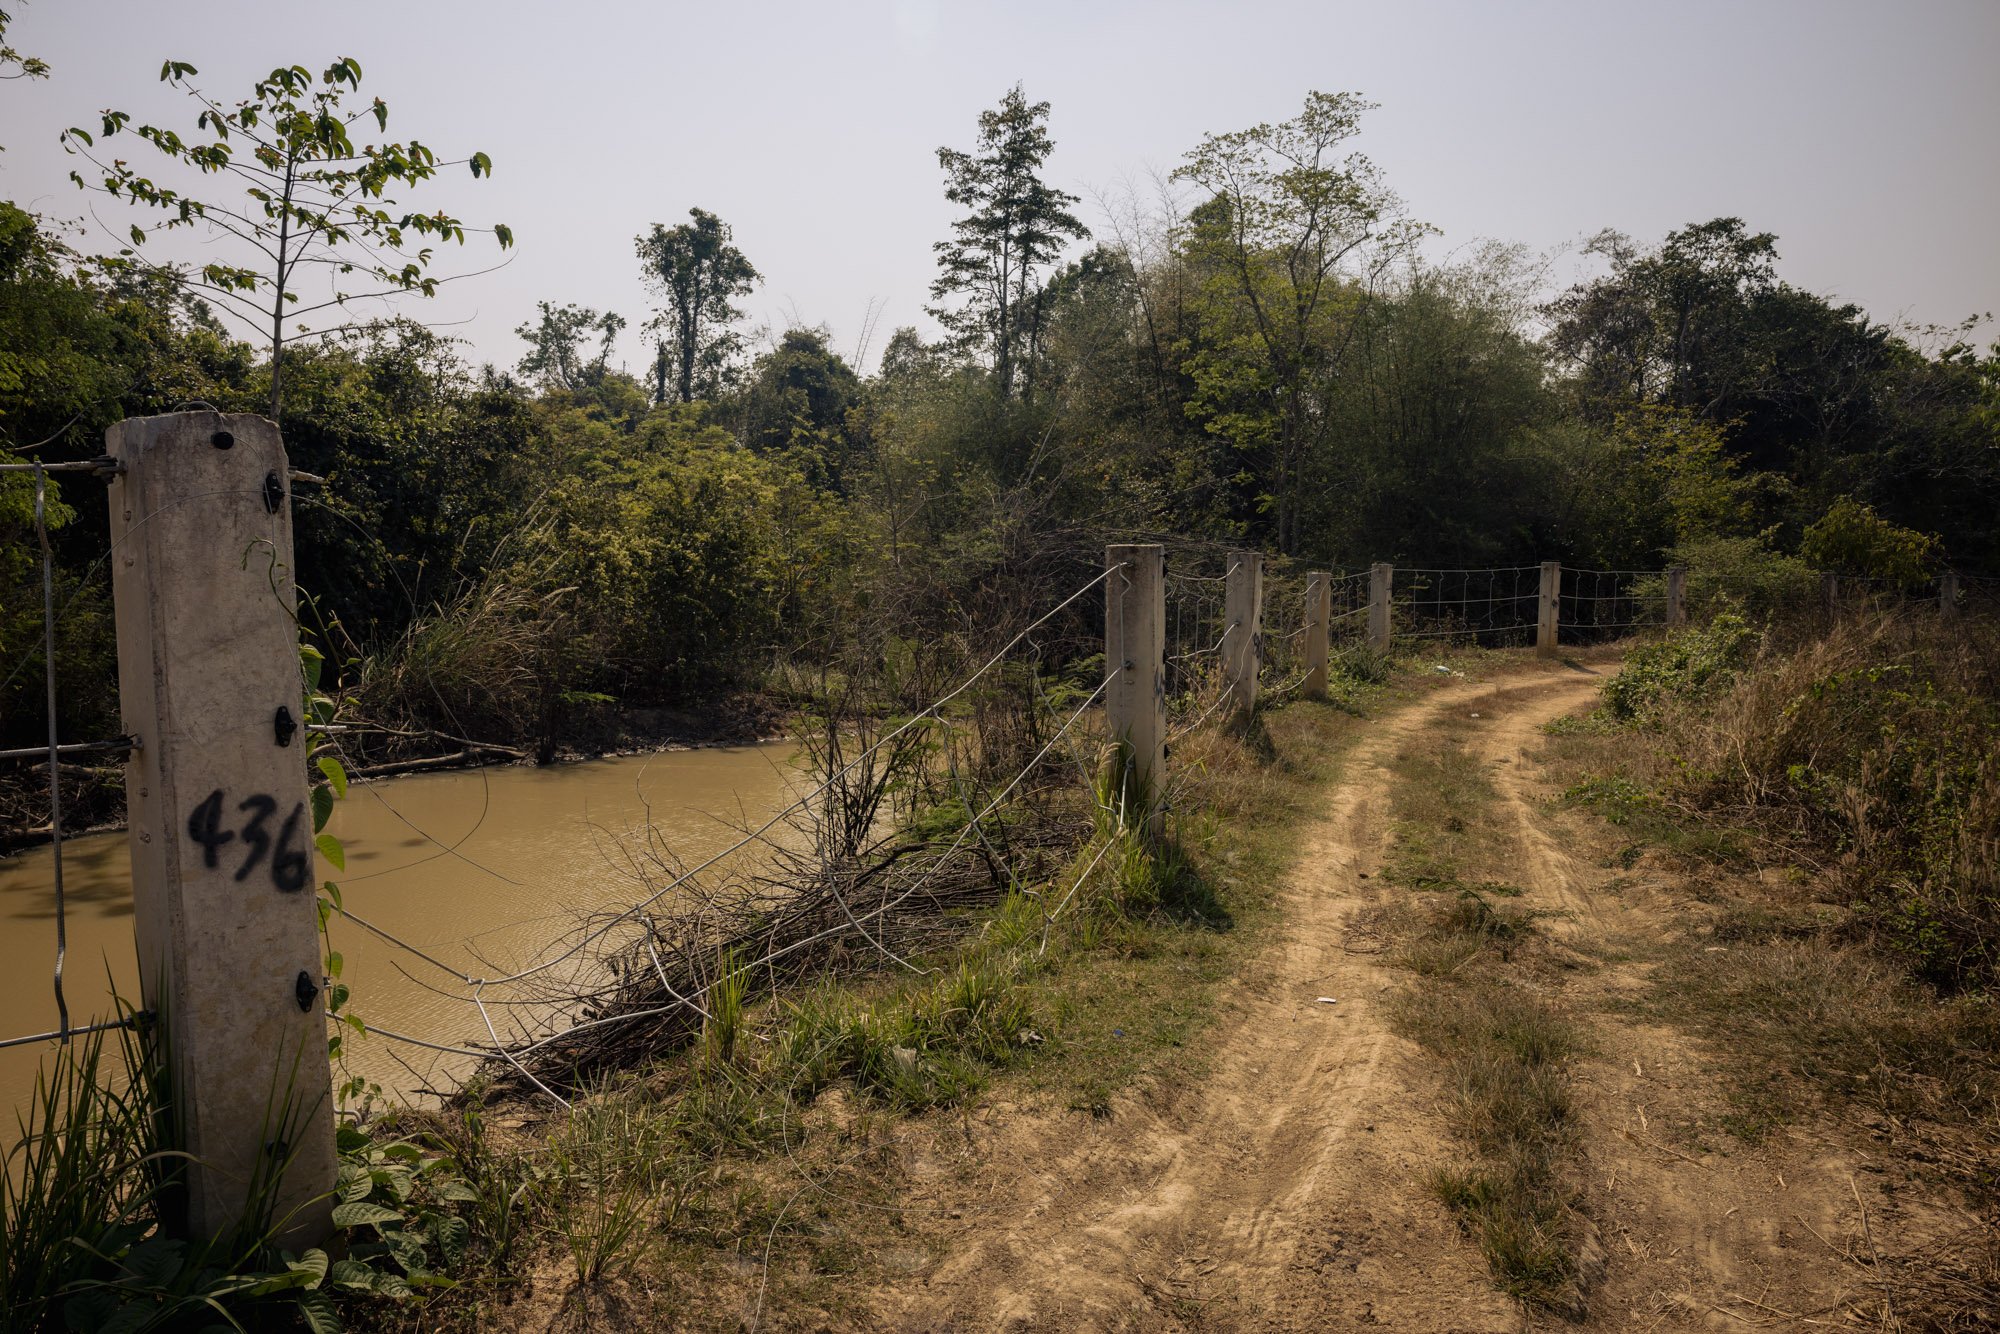  A section of a nature reserve’s perimeter fence destroyed by wild elephants, Chachoengsao, Thailand. 